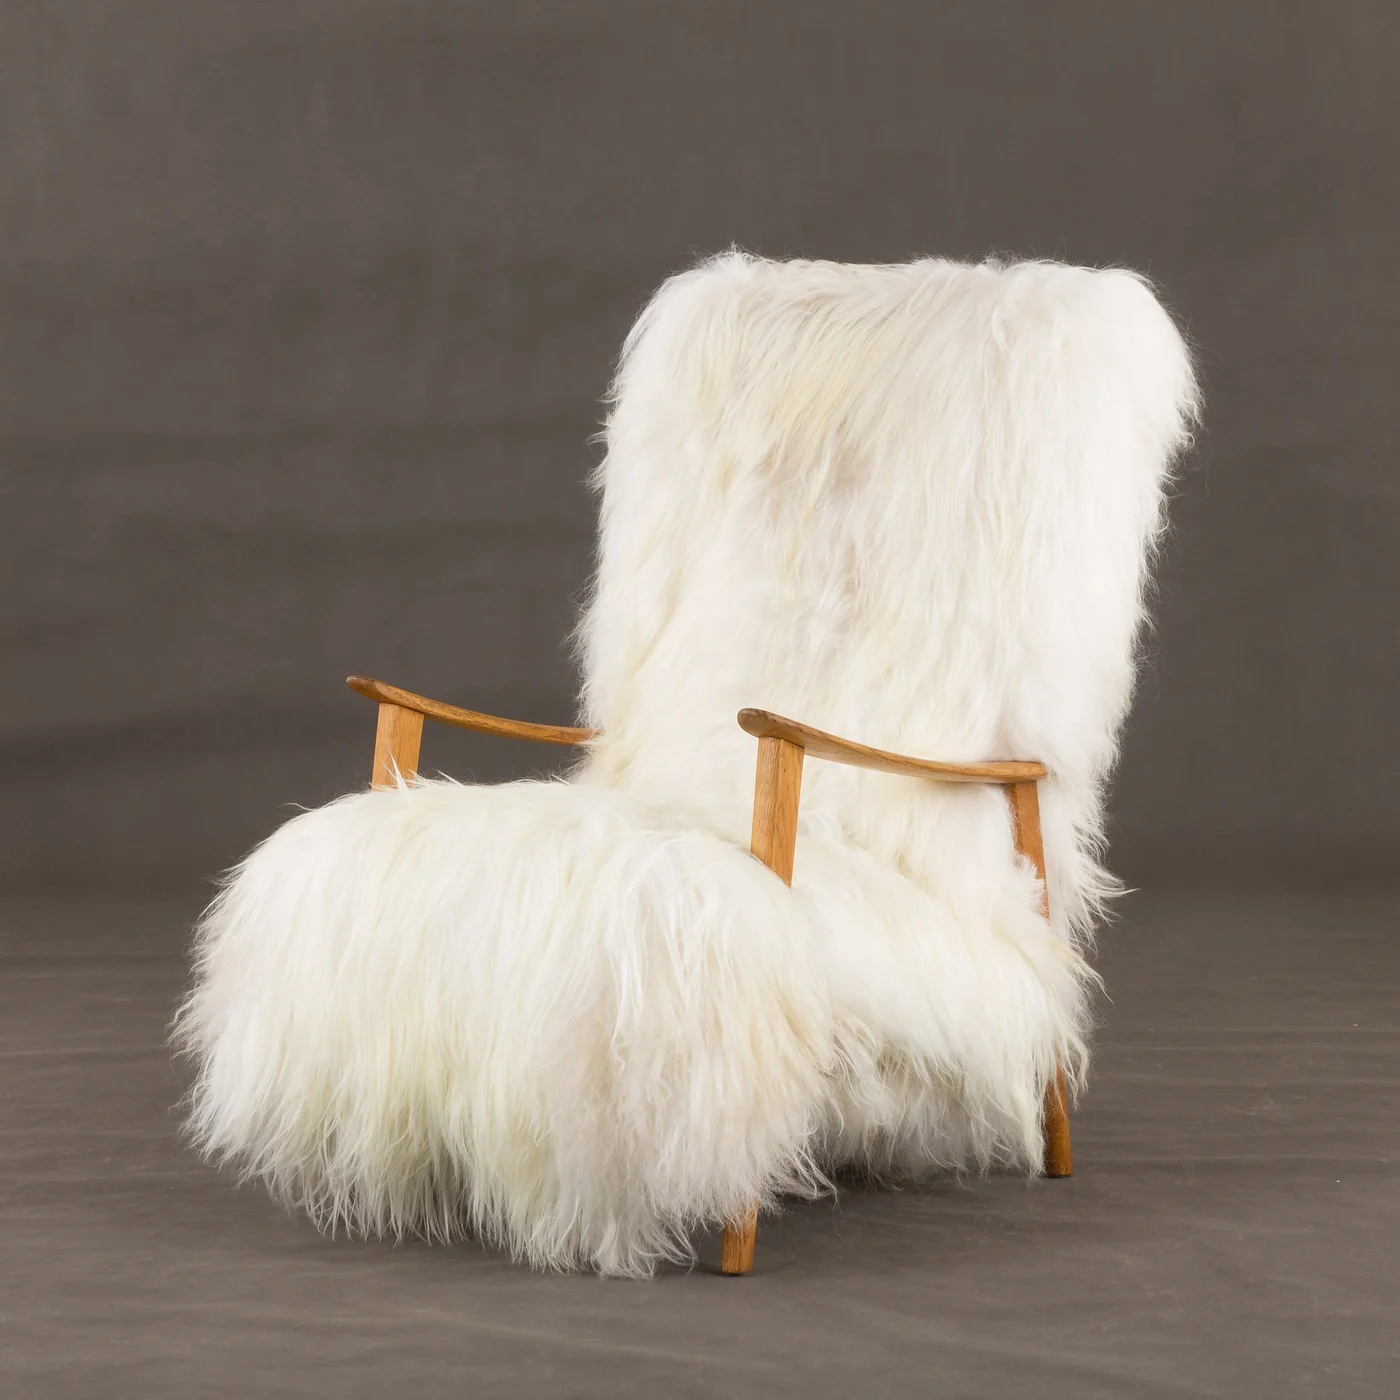 High armchair in sheep's clothing